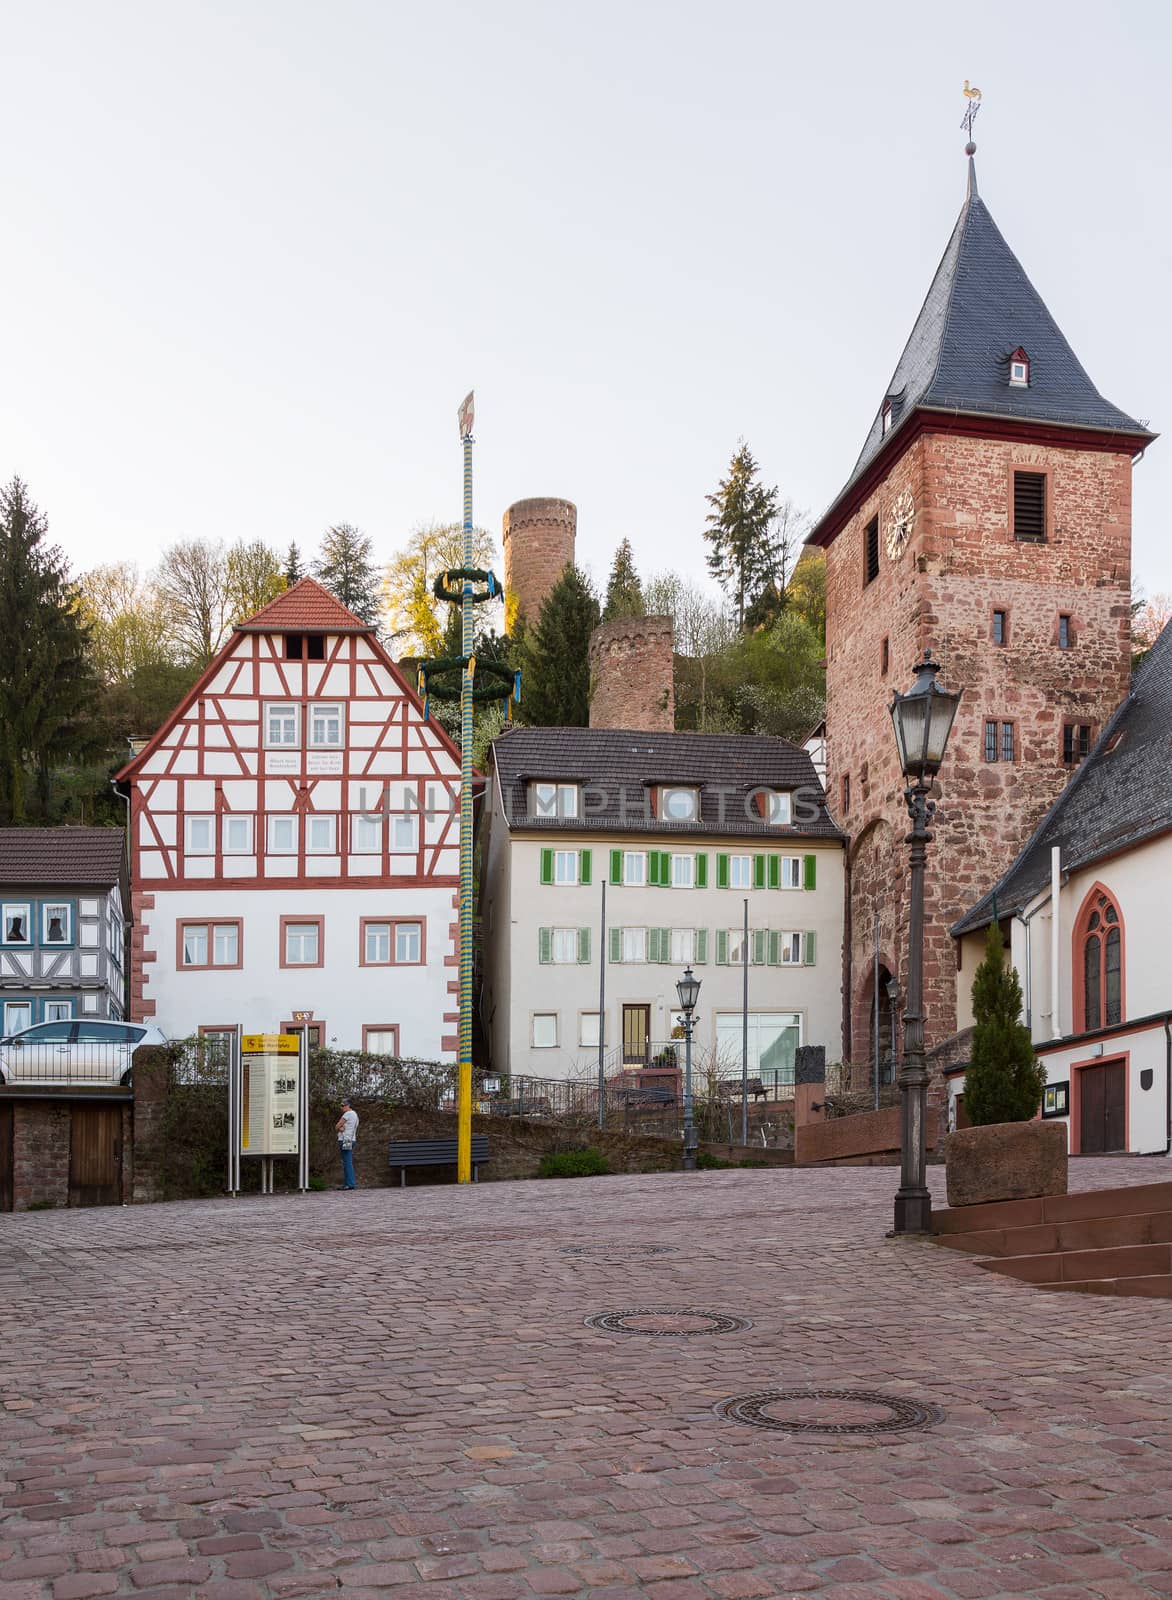 Town of Hirschhorn Hesse Germany by steheap